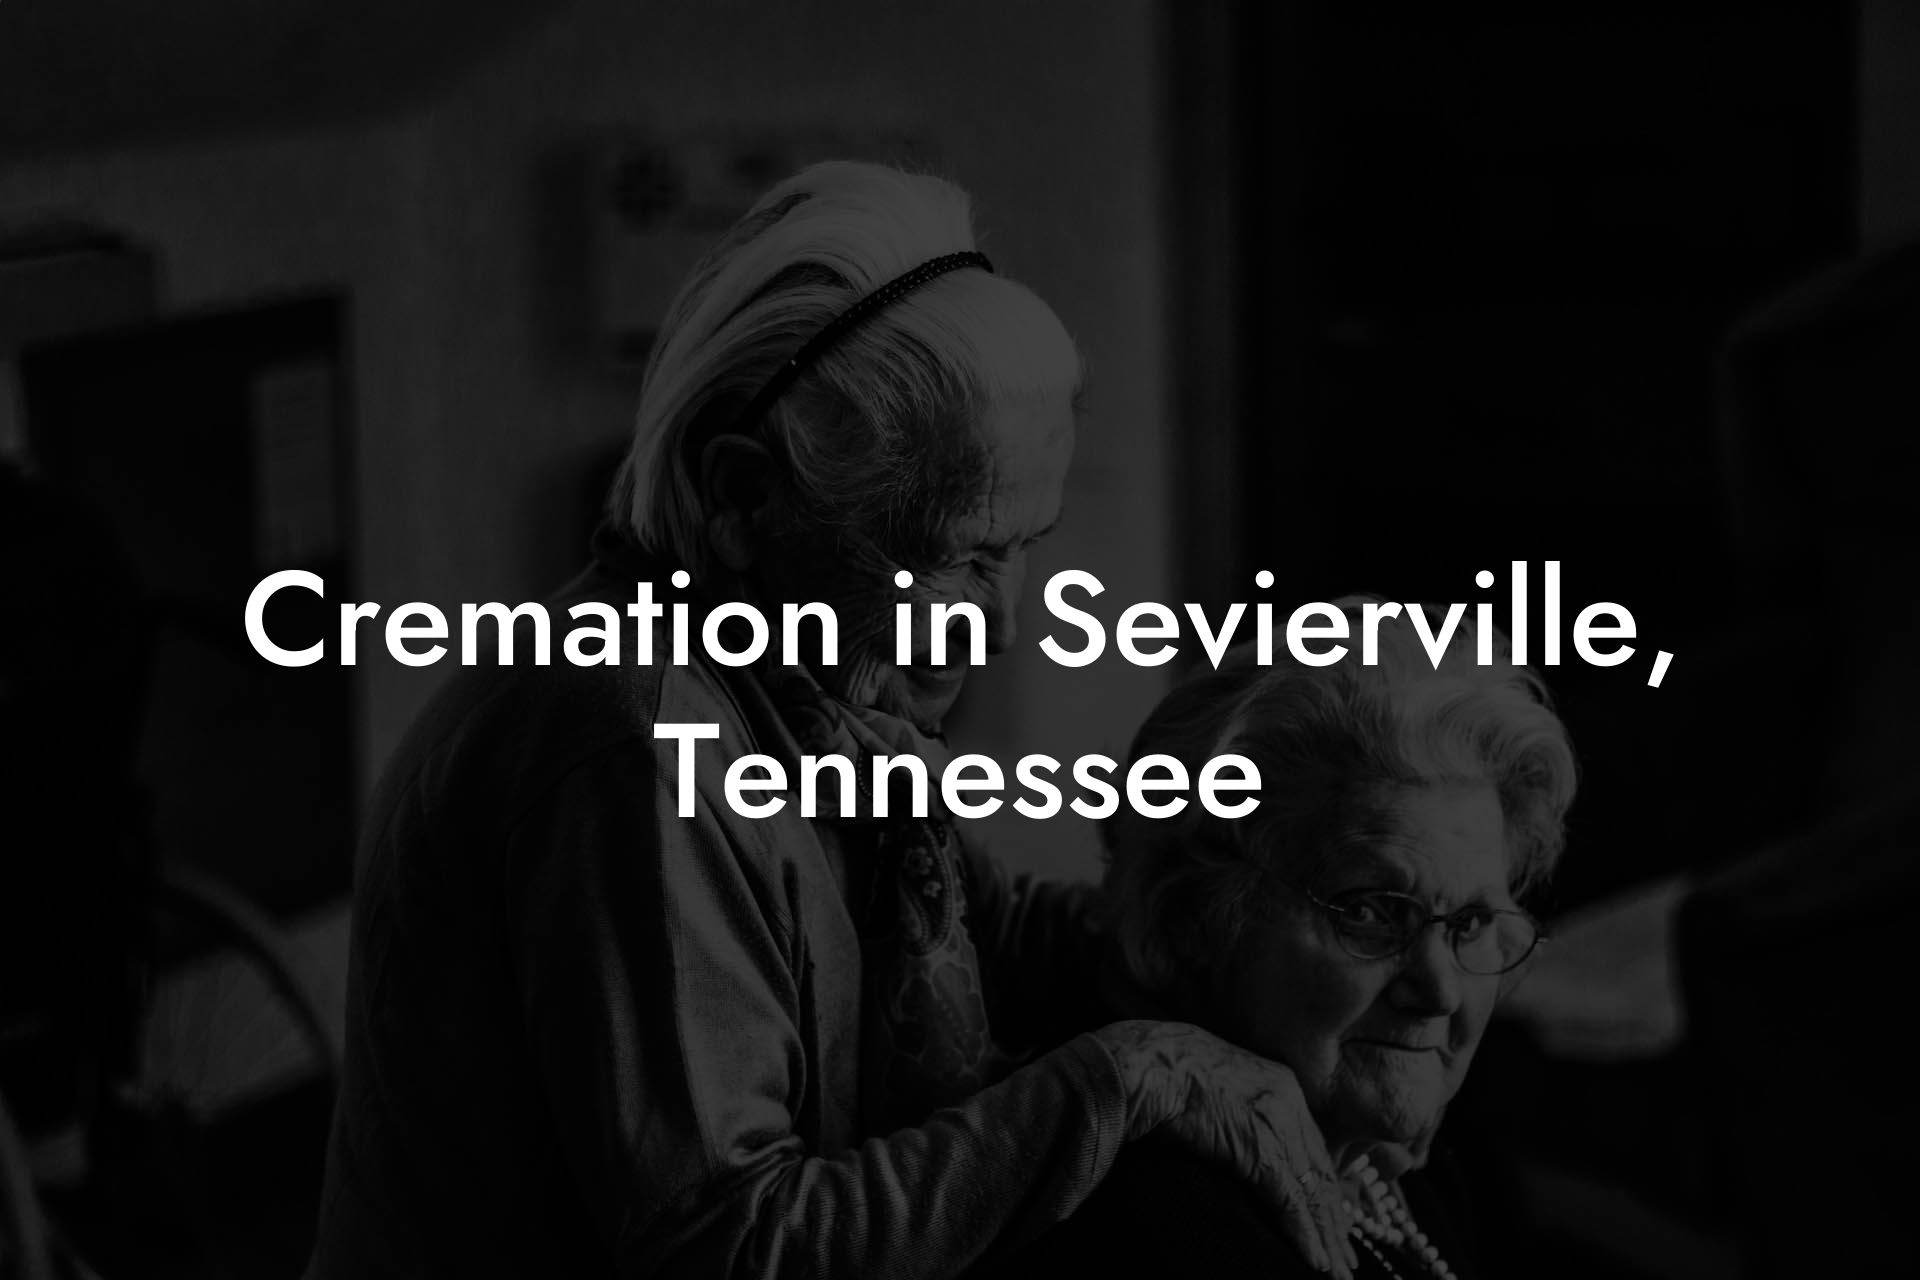 Cremation in Sevierville, Tennessee